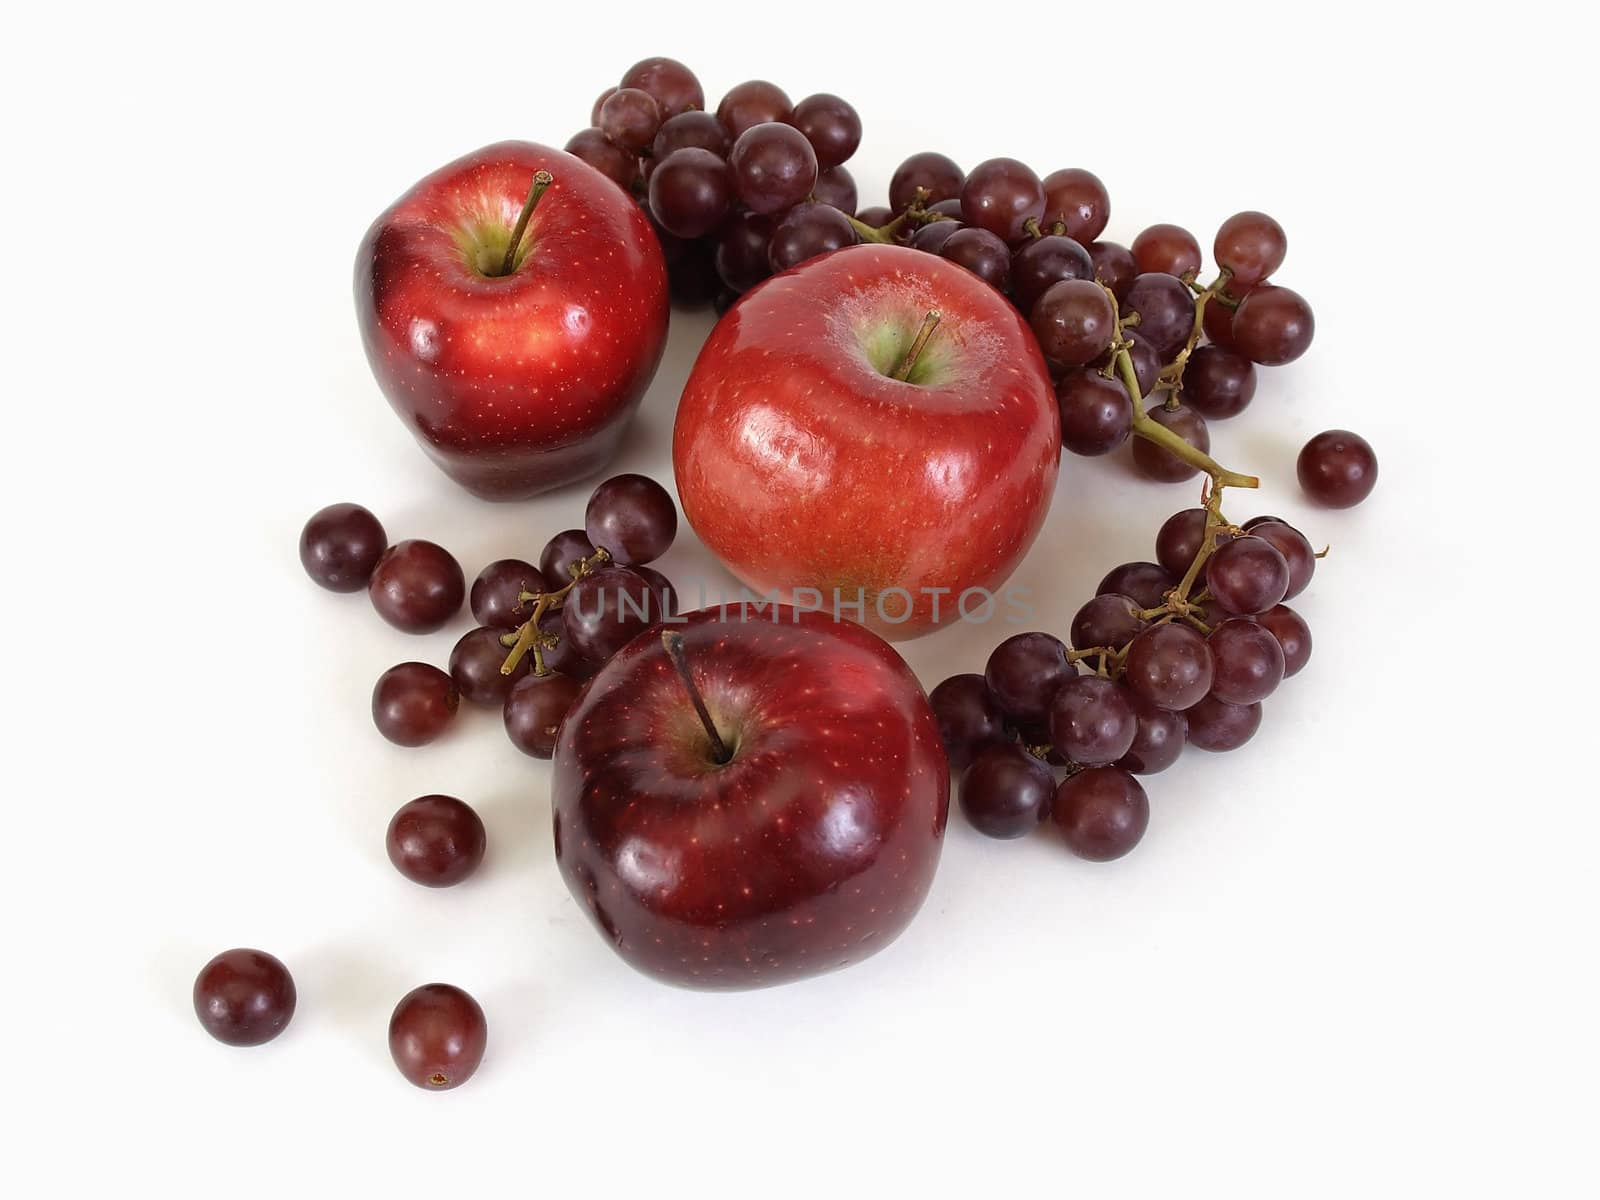 A group of three red apples and a bunch of grapes loose on a white background.